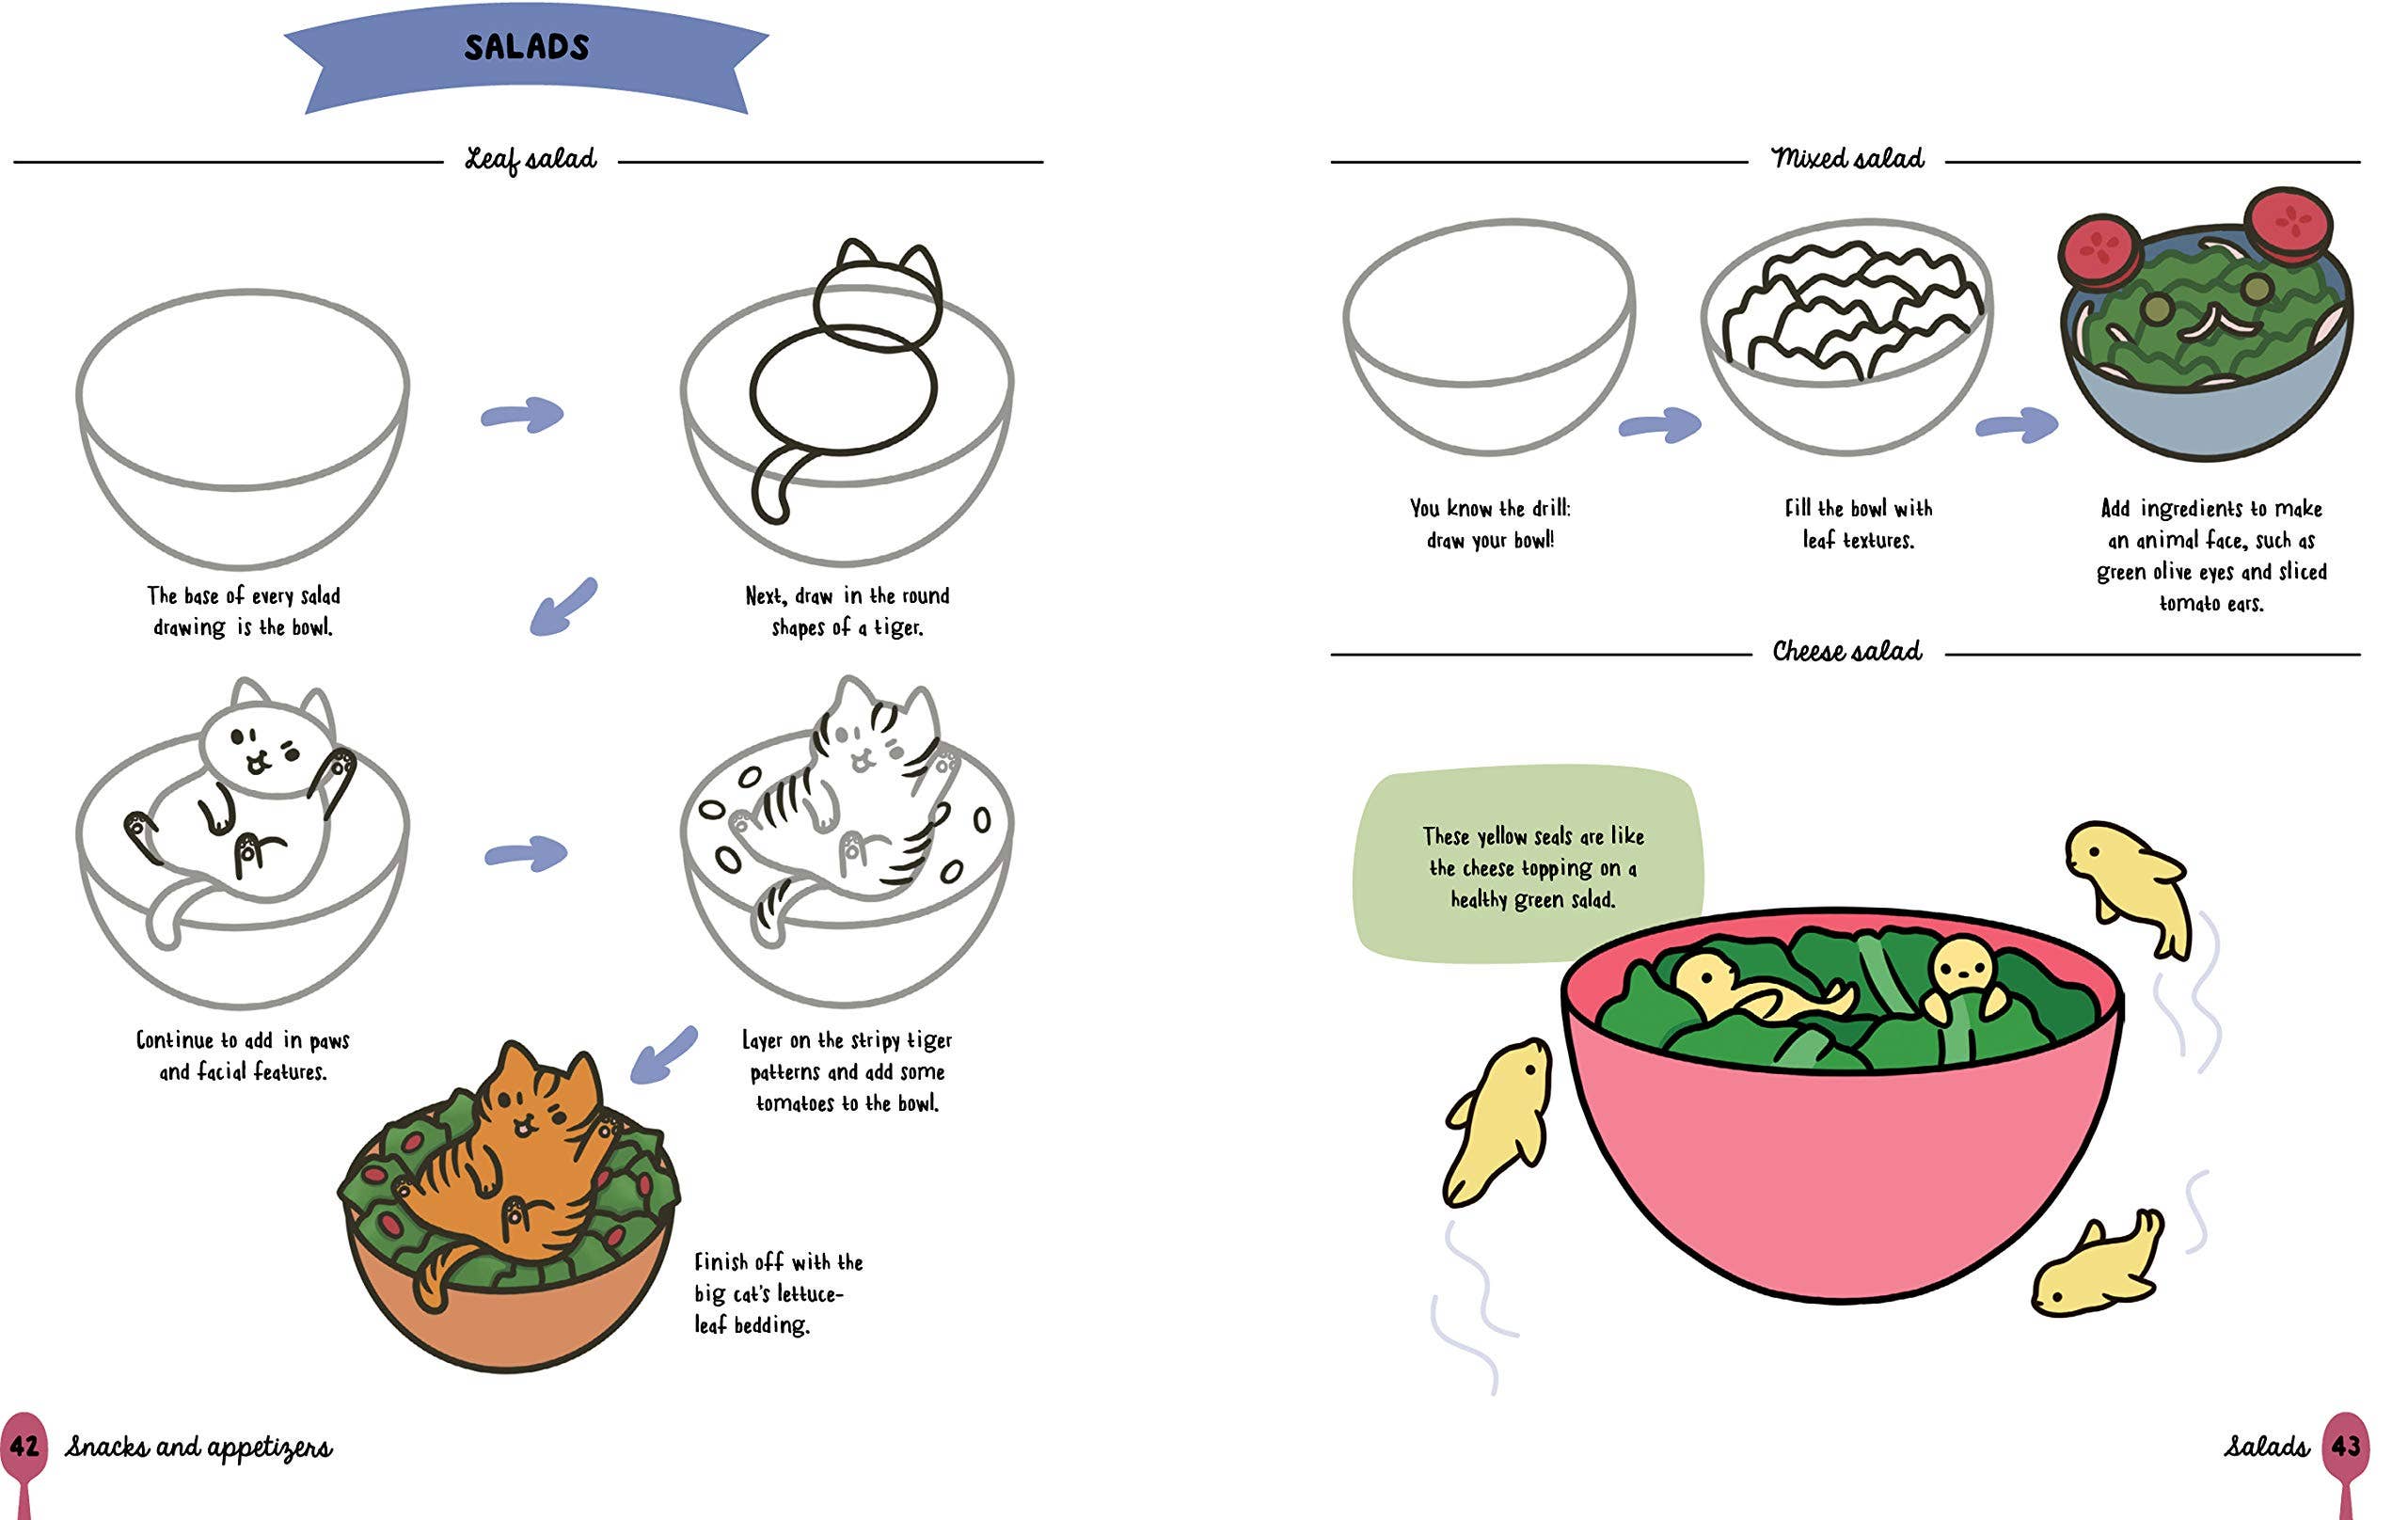 How to Draw Cute Food by Angela Nguyen